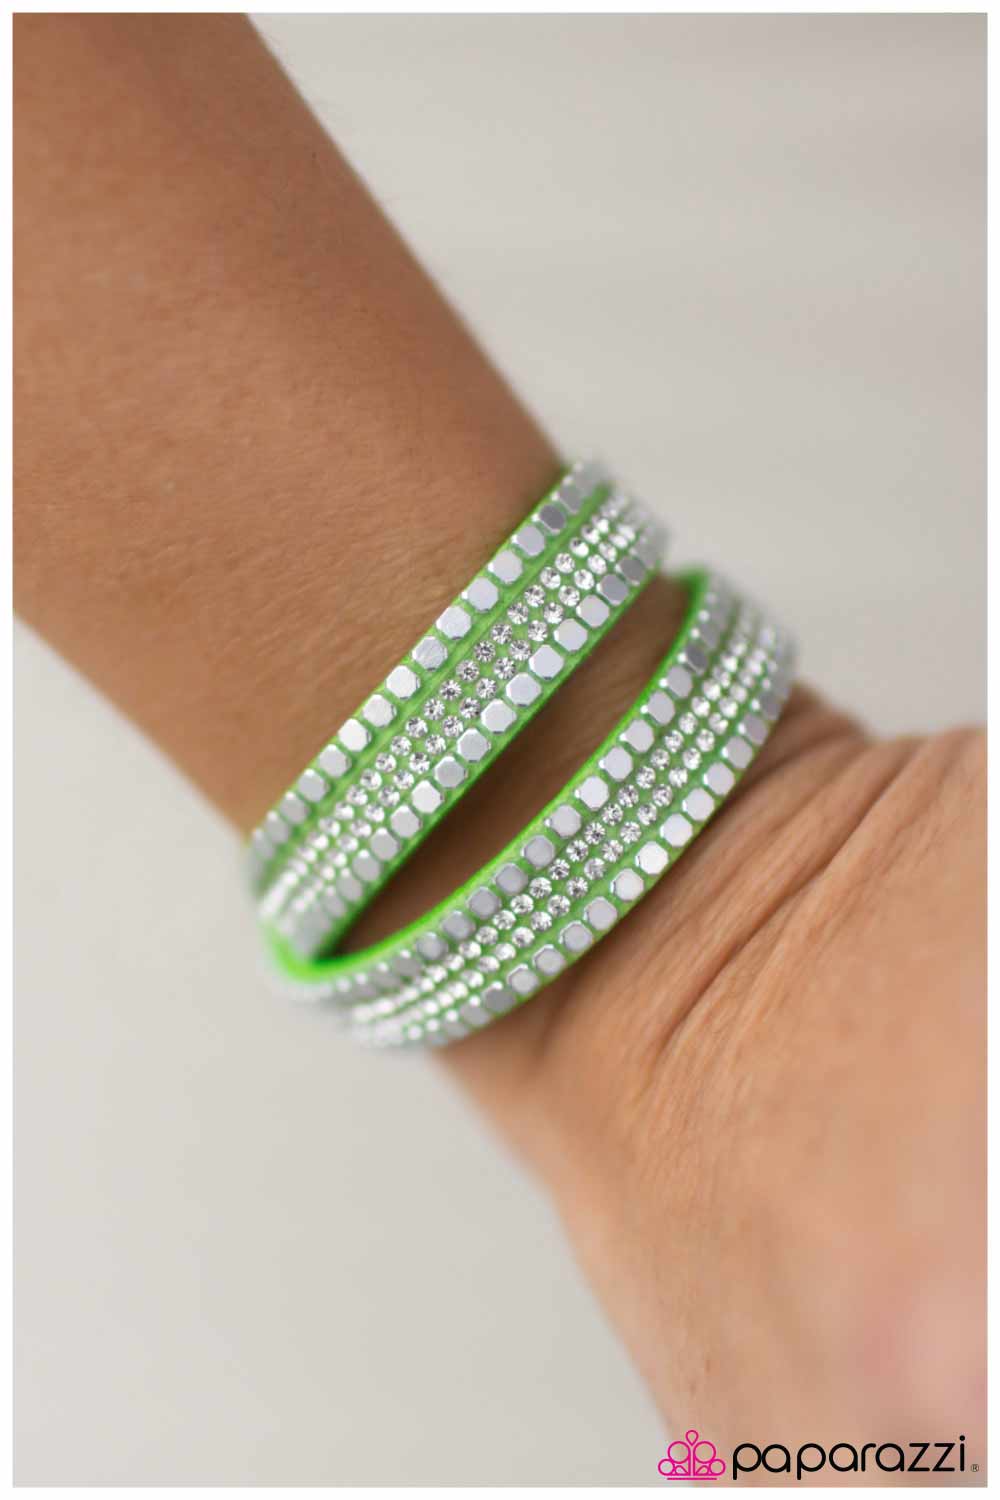 What Your Mama Gave You - Green -Paparazzi bracelet